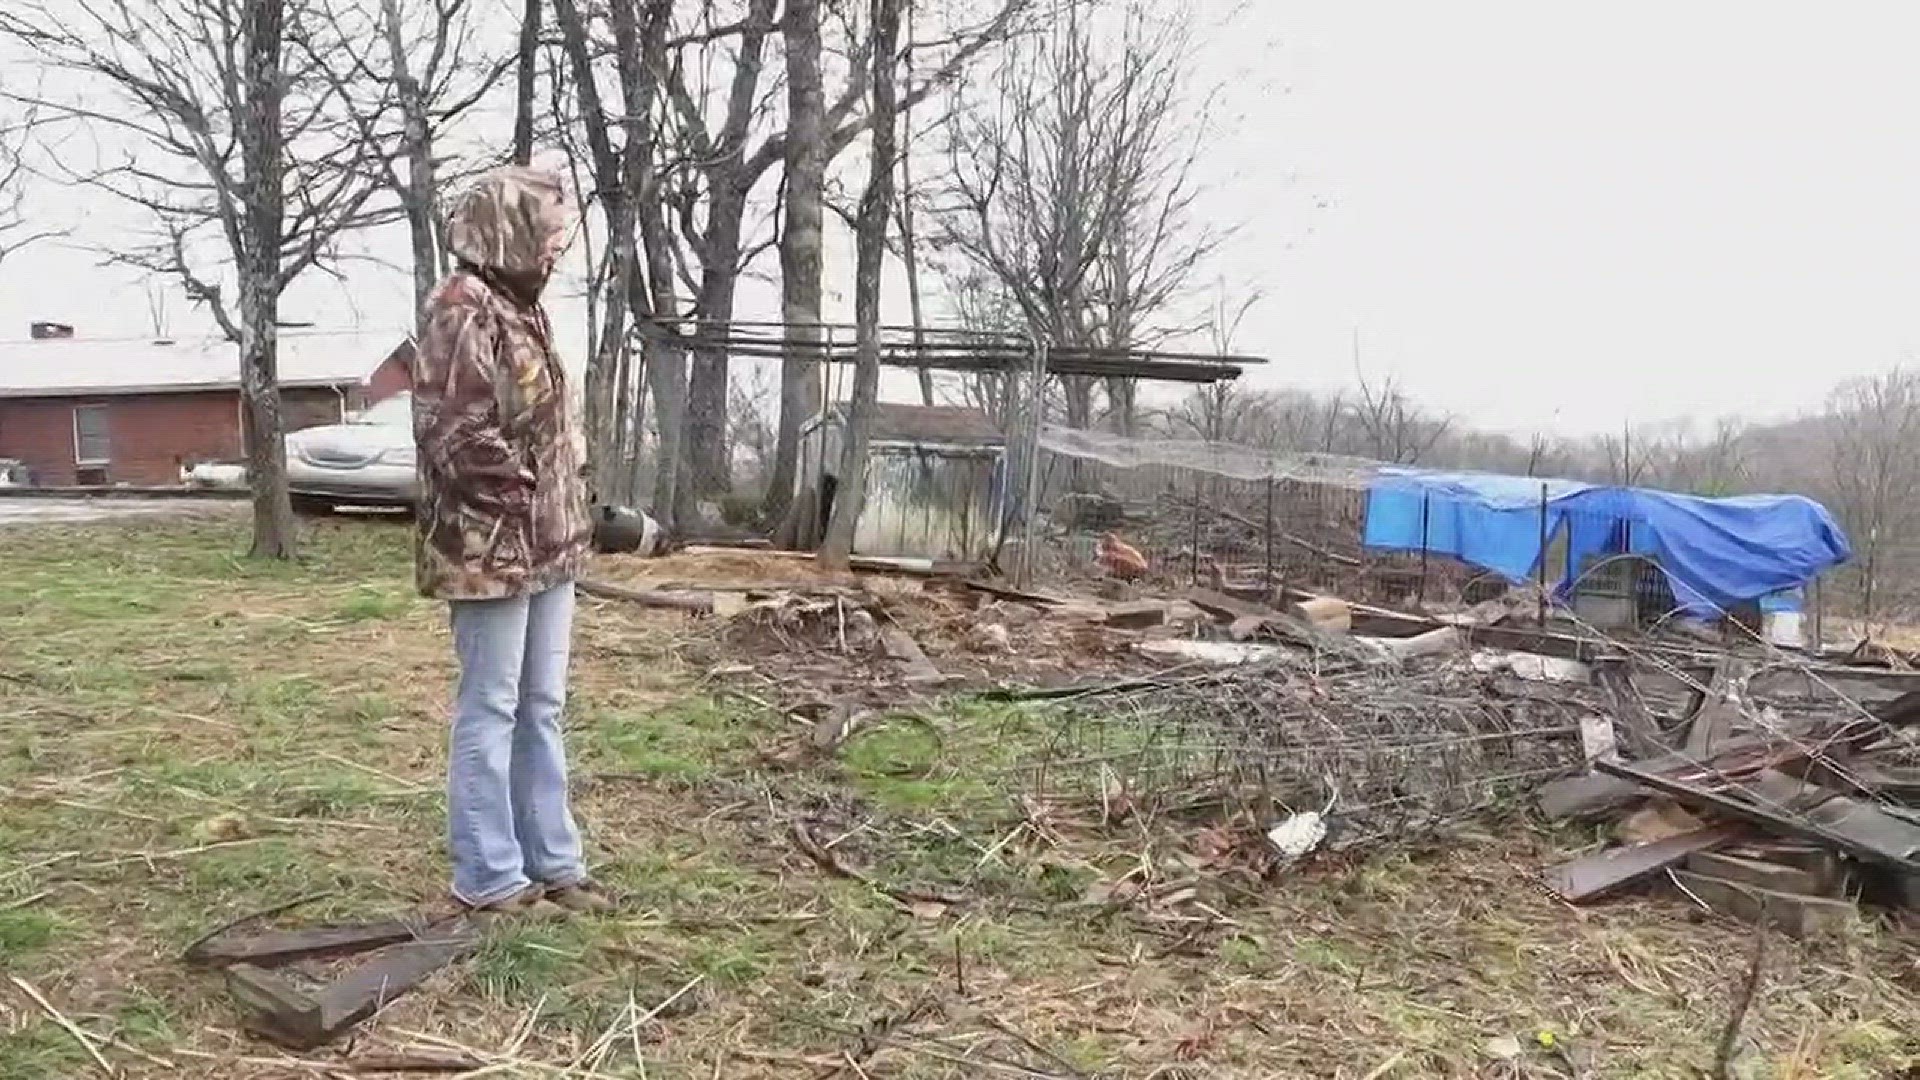 March 19, 2018: Families in Monroe County are cleaning up after an EF-0 tornado hit a remote part of the county.